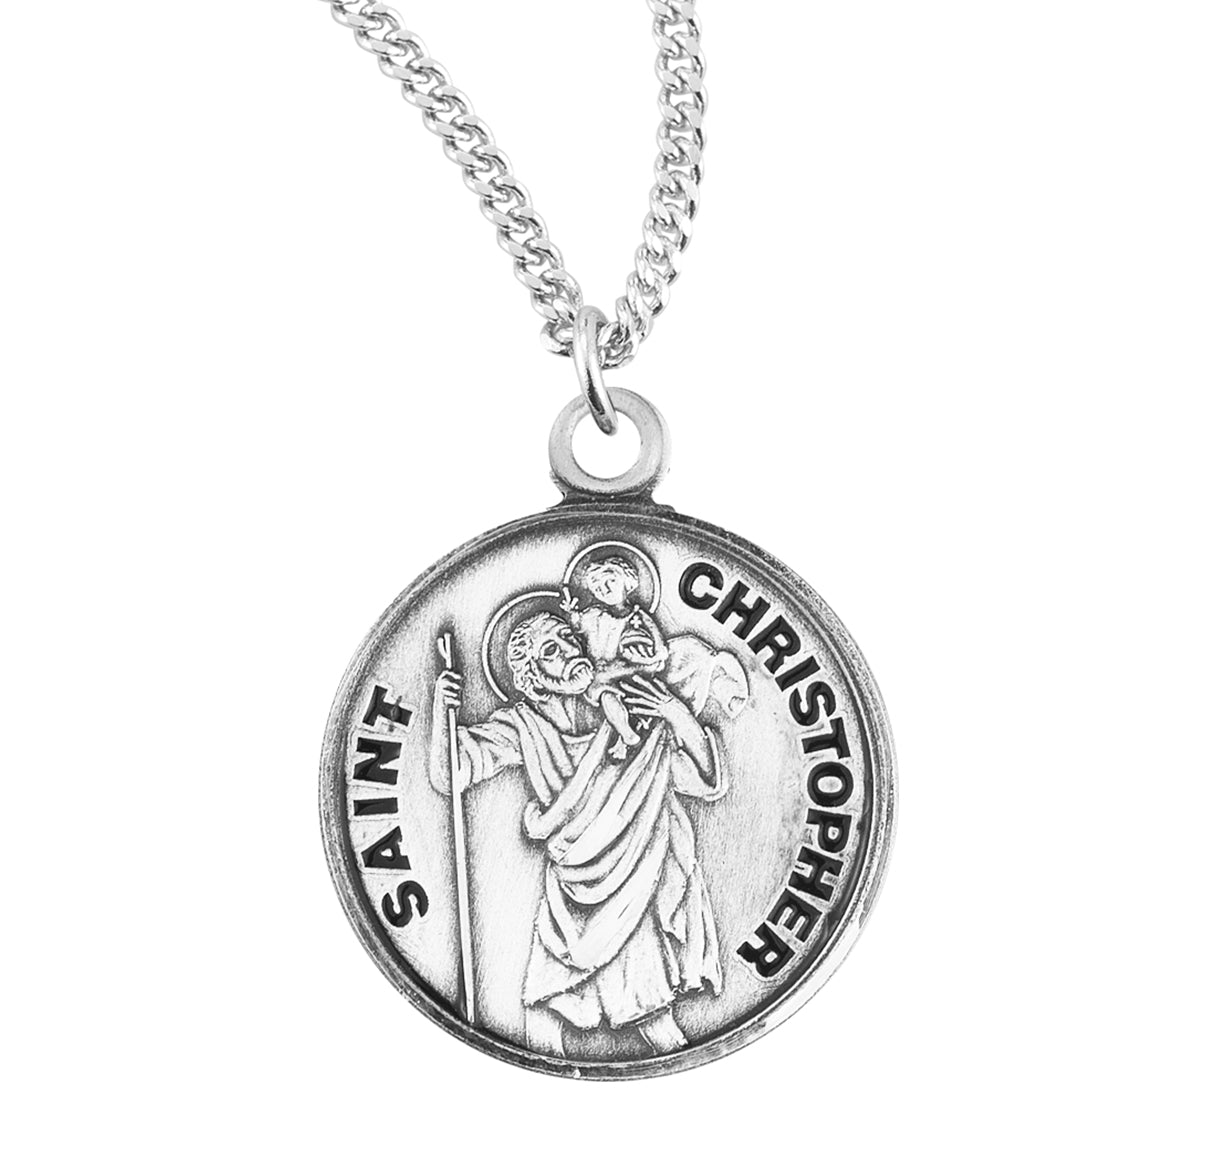 Paint Christopher Round Sterling Silver Medal